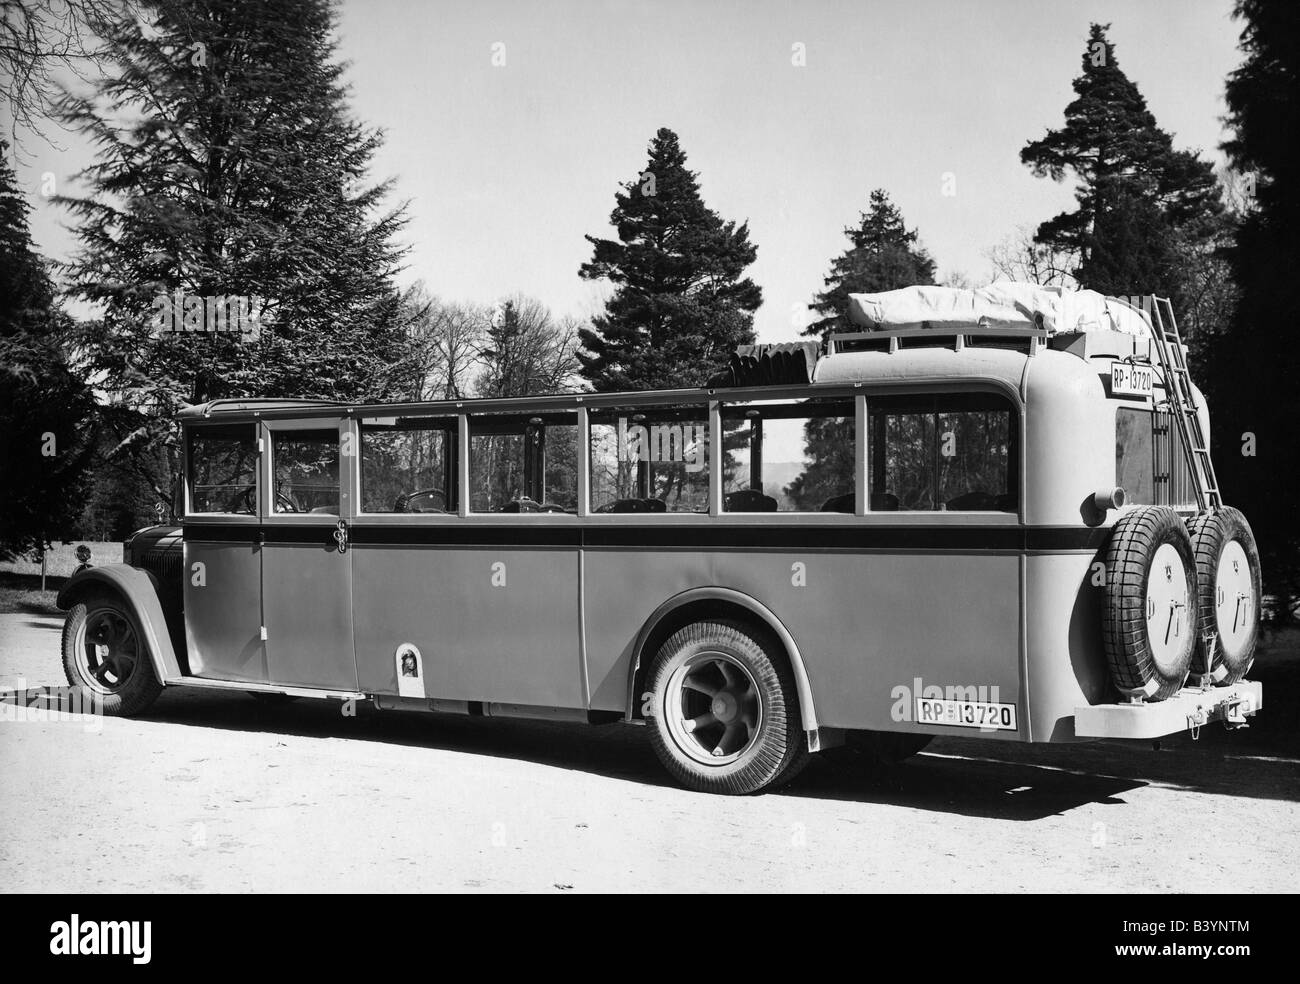 Transports / transports, transports en commun, bus, Mercedes All-weather Dome car O 4000 du Reichspost, 1930, Banque D'Images